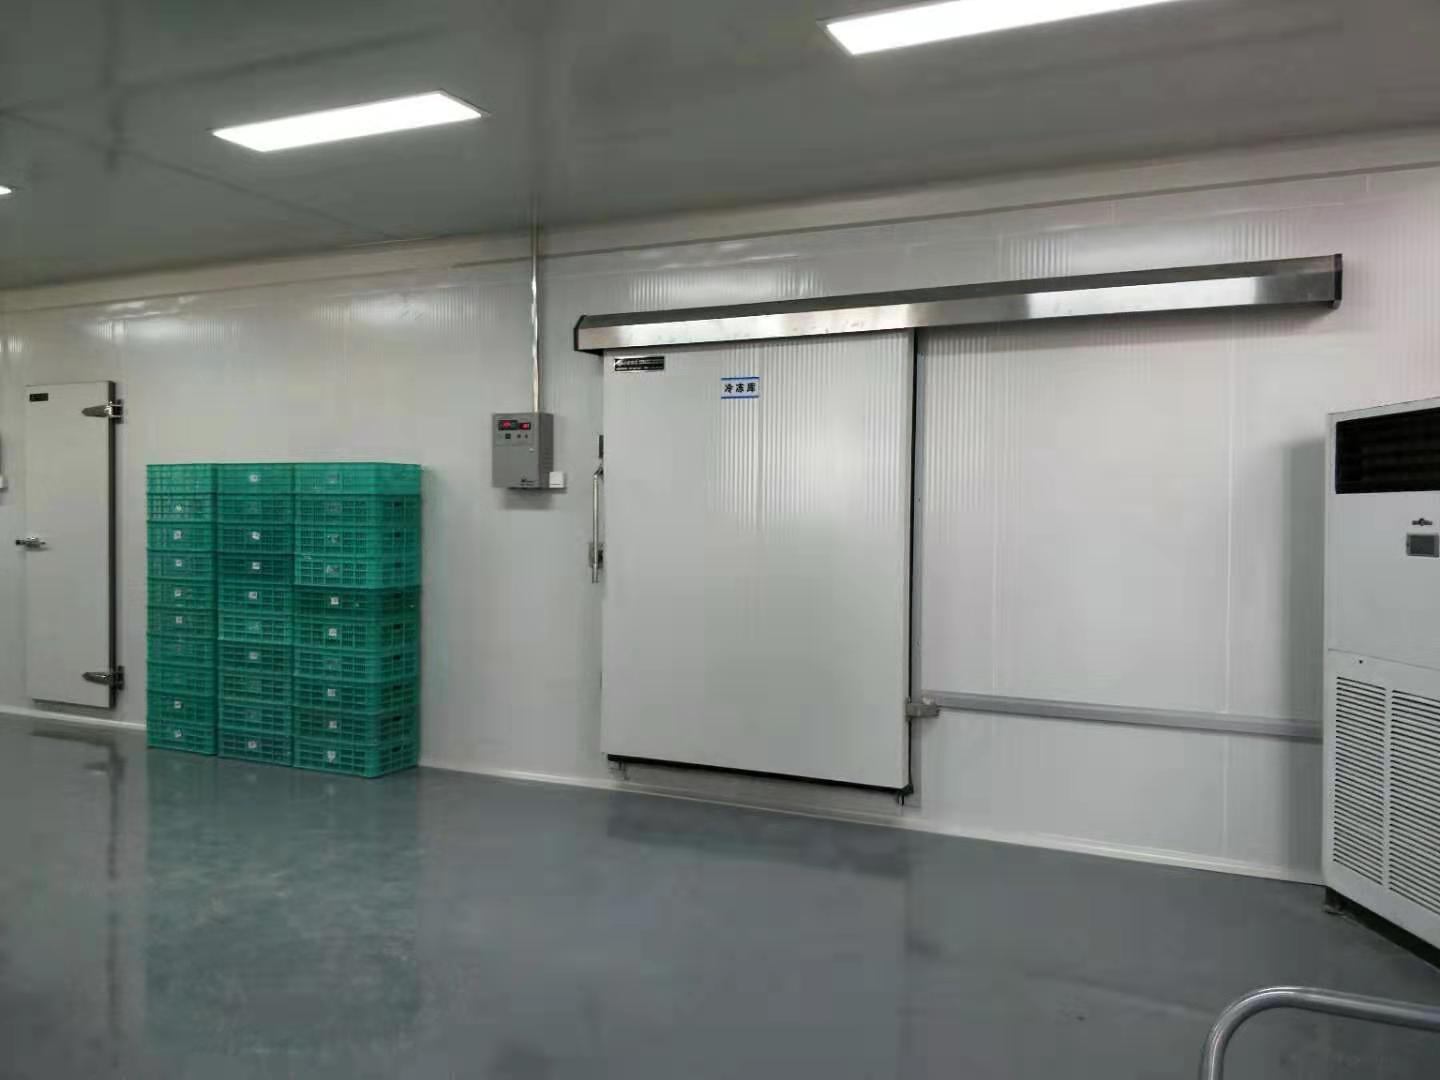 How to design and install cold storage to save energy and reduce emissions？